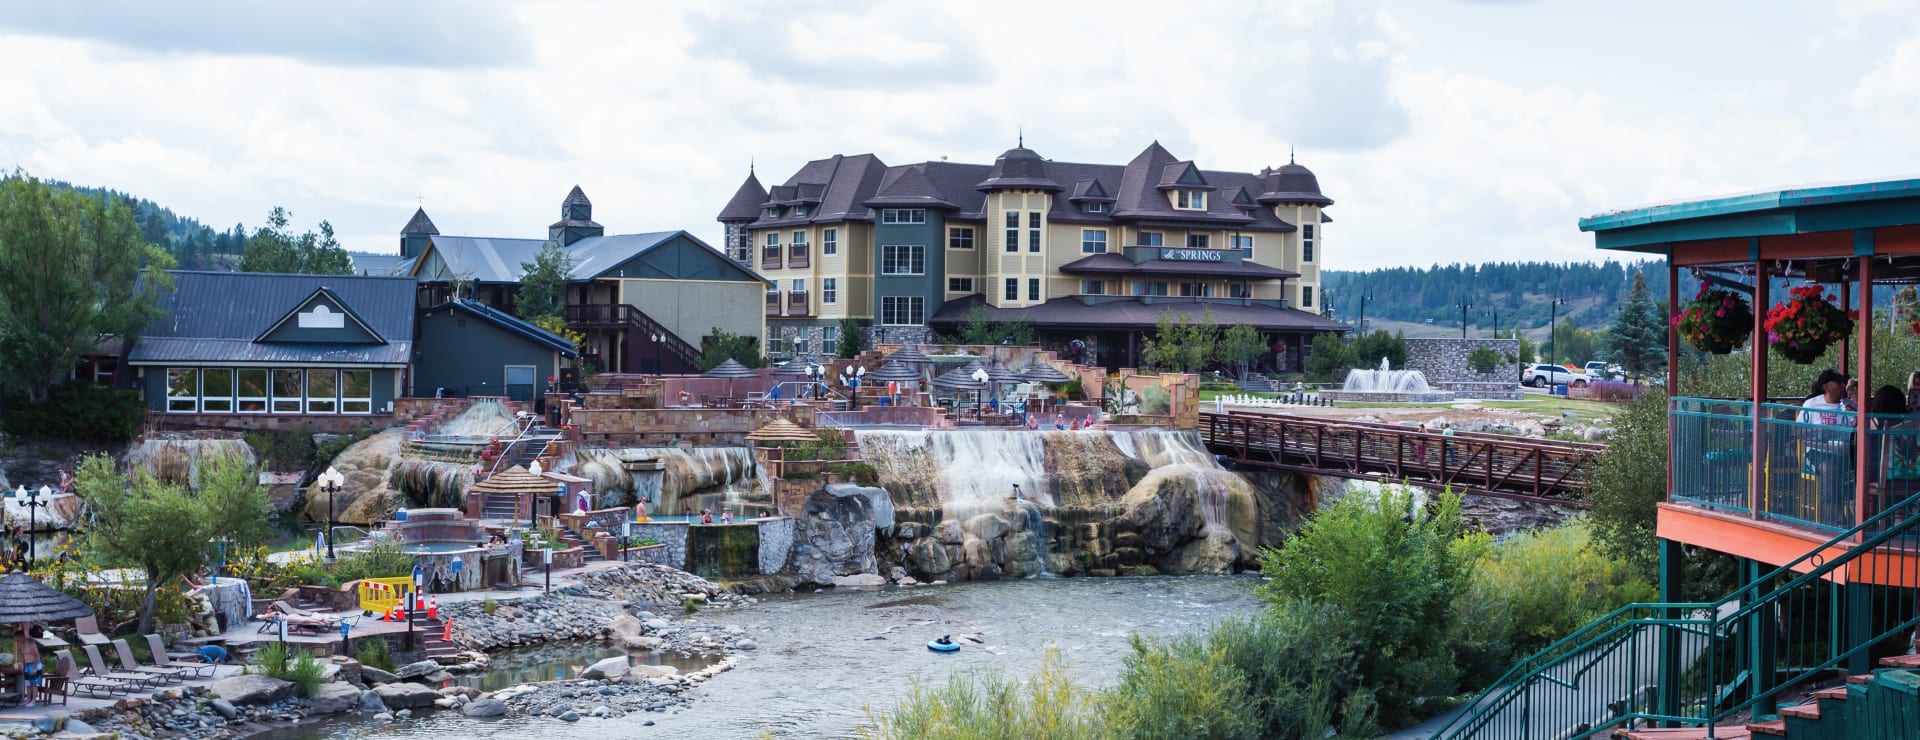 Lively view of Pagosa Springs, Colorado